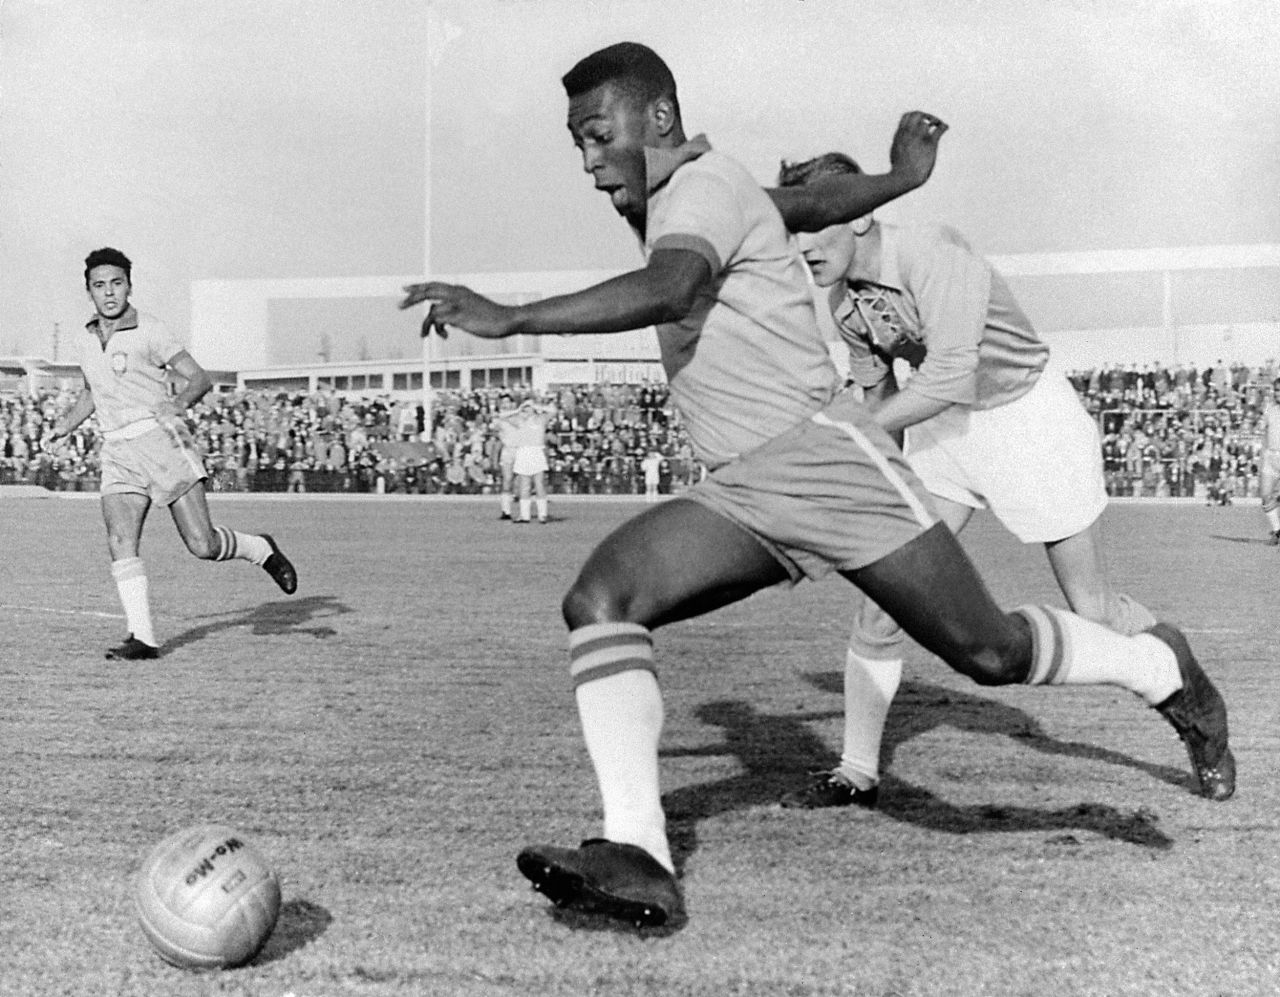 Football historian Richard McBrearty believes Watson paved the way for future stars such as Brazilian legend Pele.